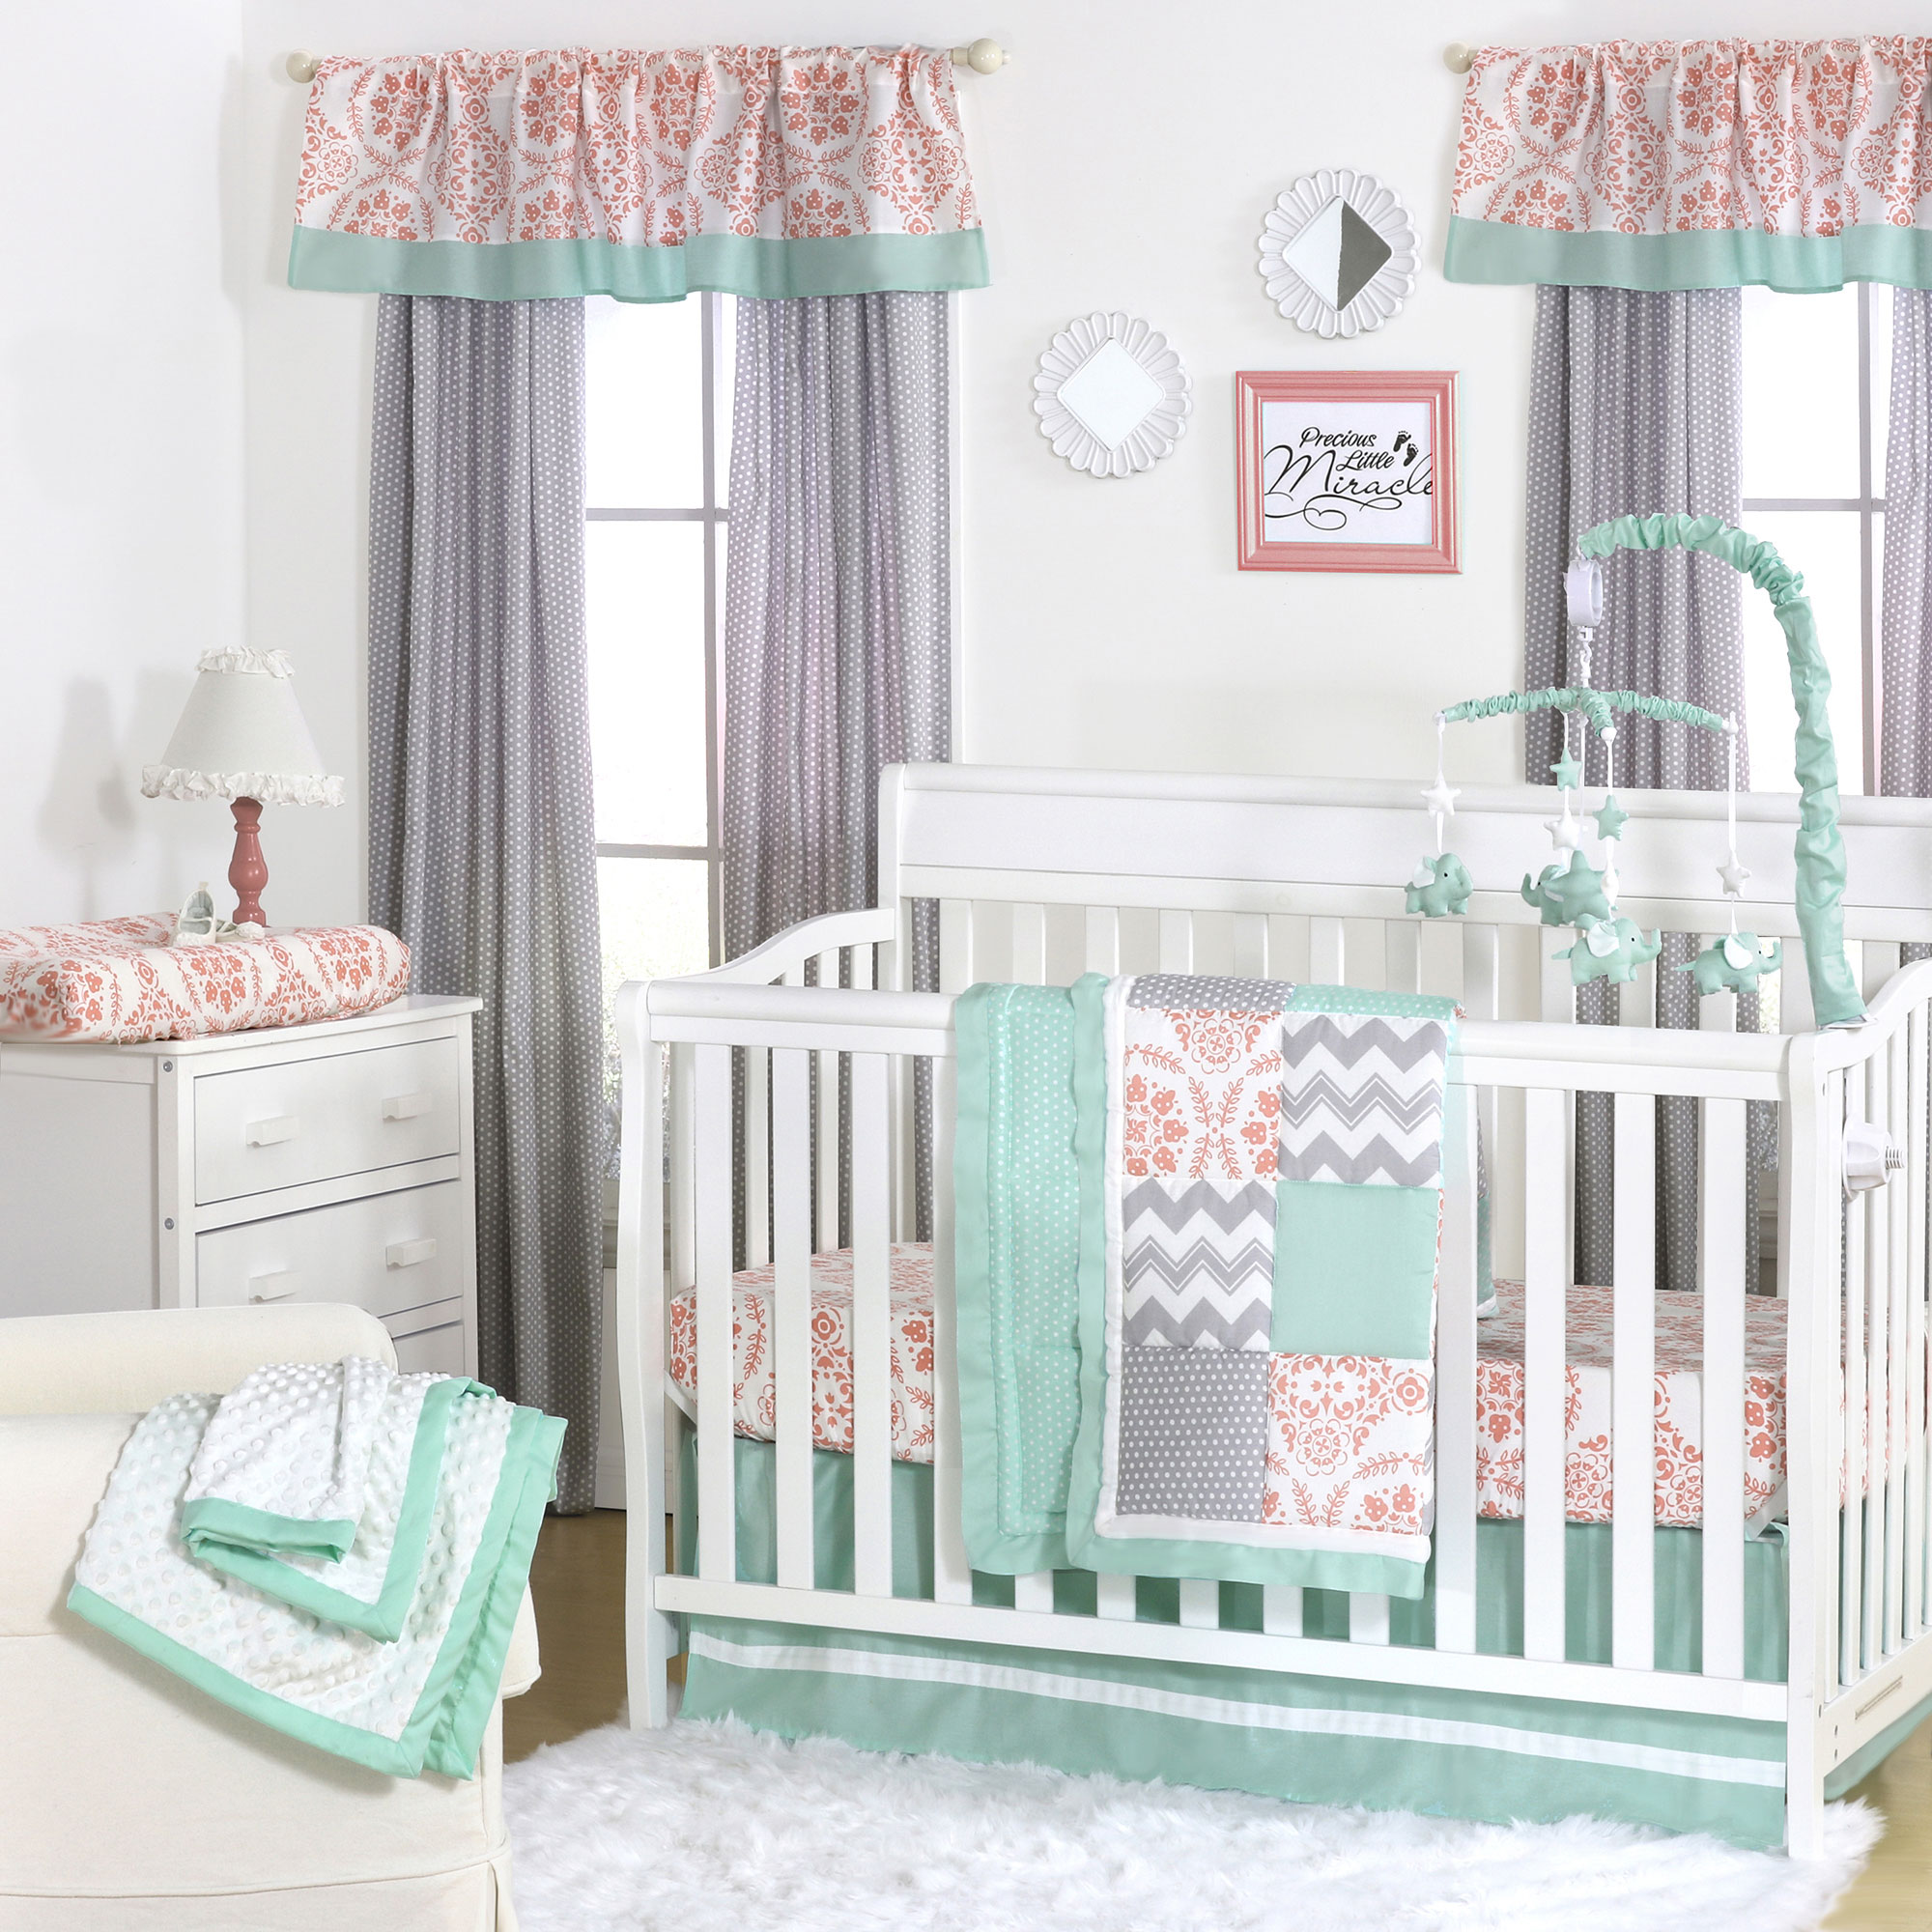 Details about Mint, Coral and Grey Patchwork 3 Piece Baby Crib Bedding Set  by The Peanut Shell